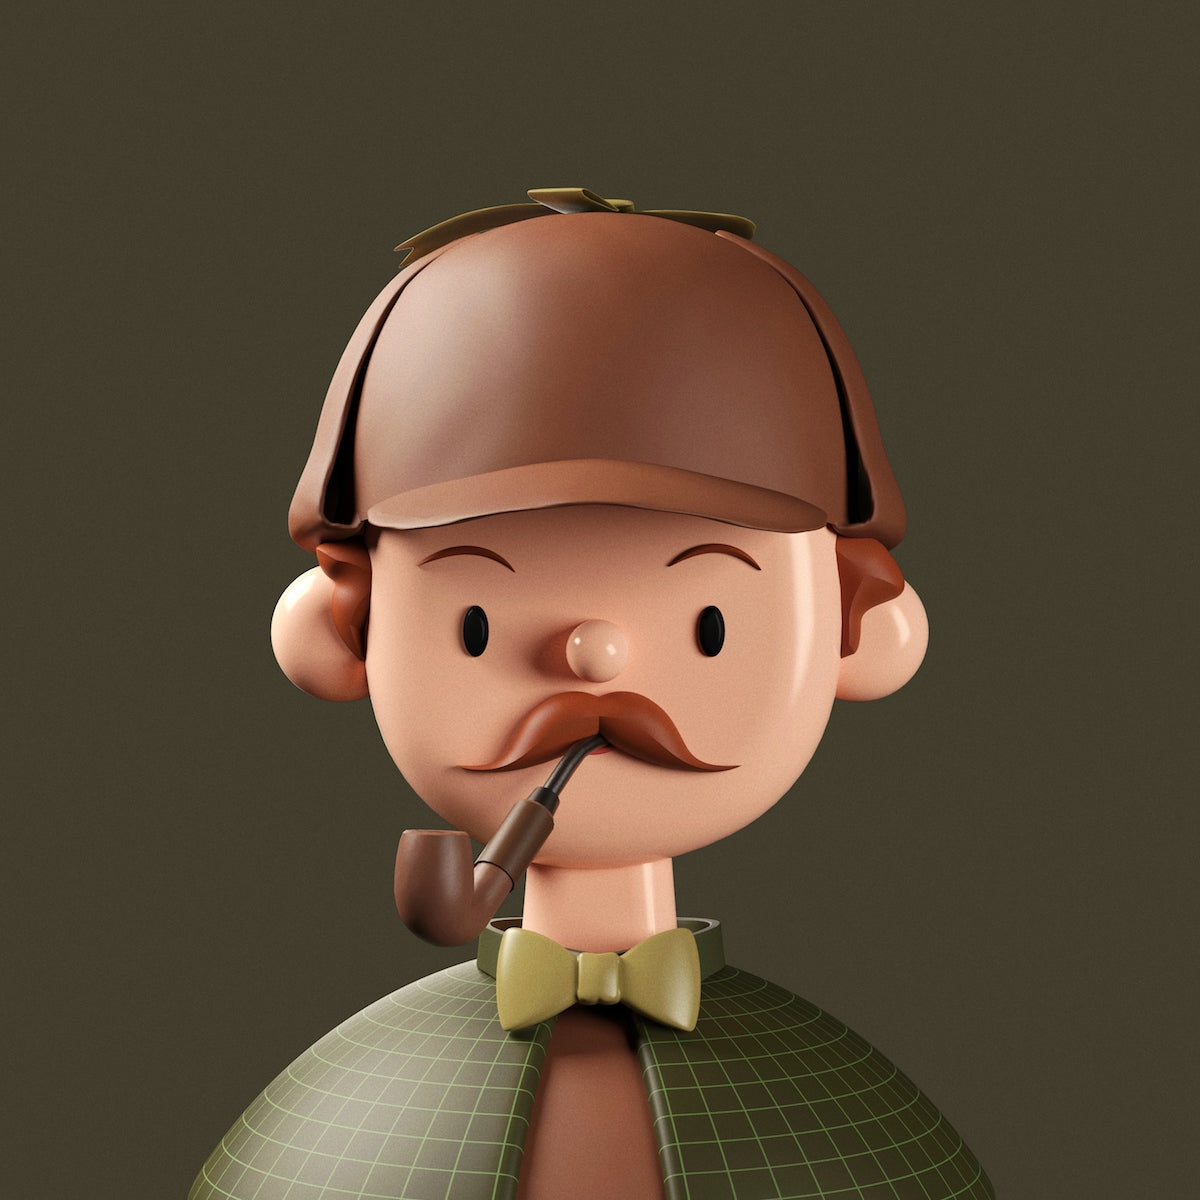 Detective Toy Face by Amrit Pal Singh